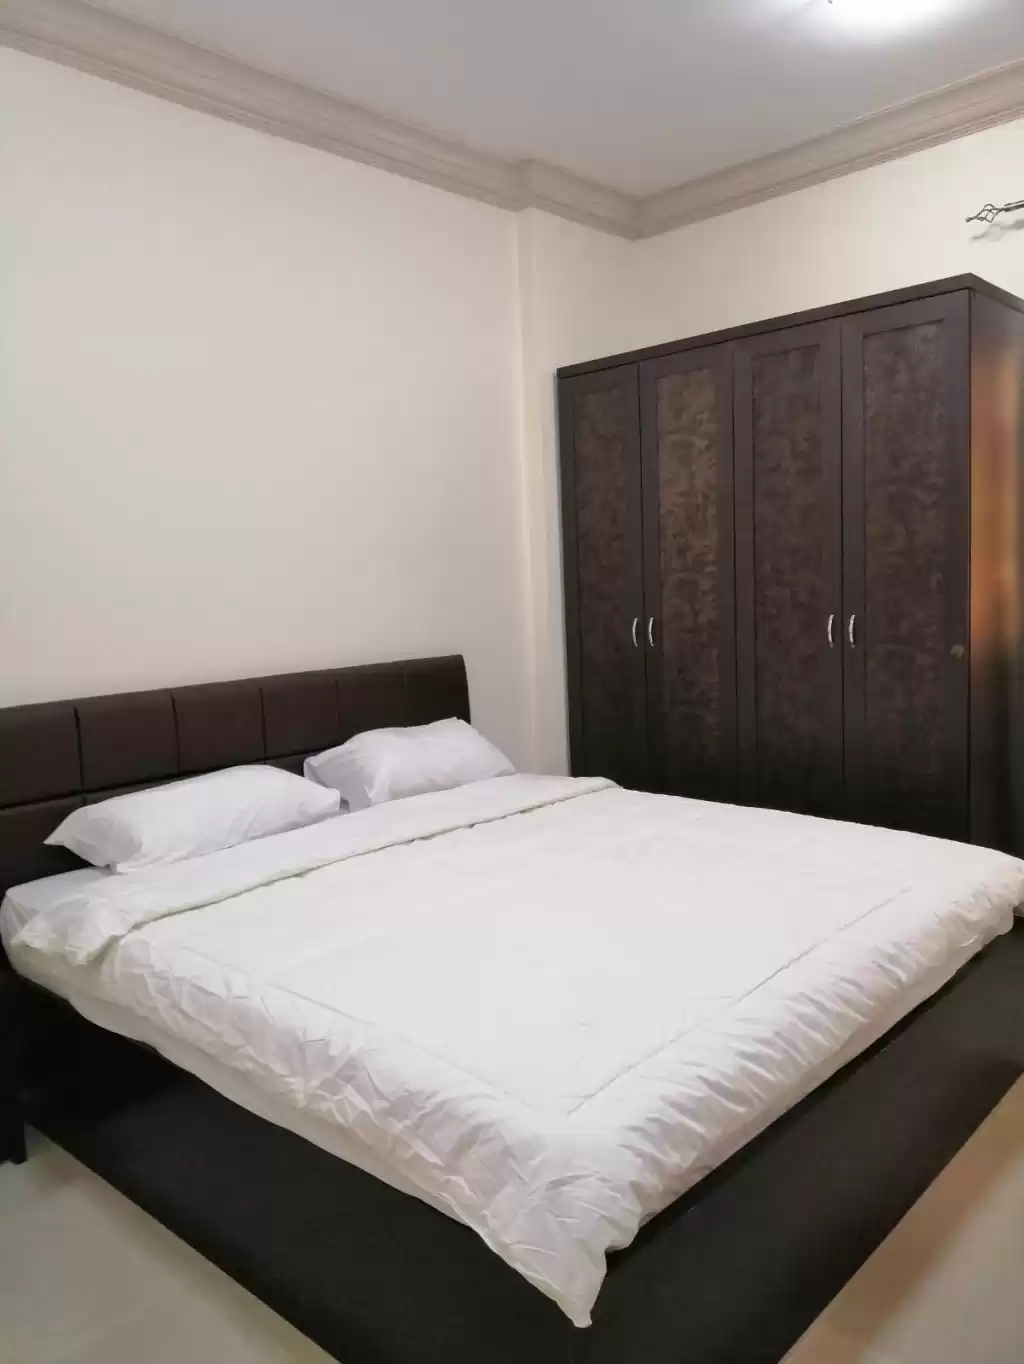 Residential Ready Property 2 Bedrooms F/F Apartment  for rent in Al Sadd , Doha #15814 - 1  image 